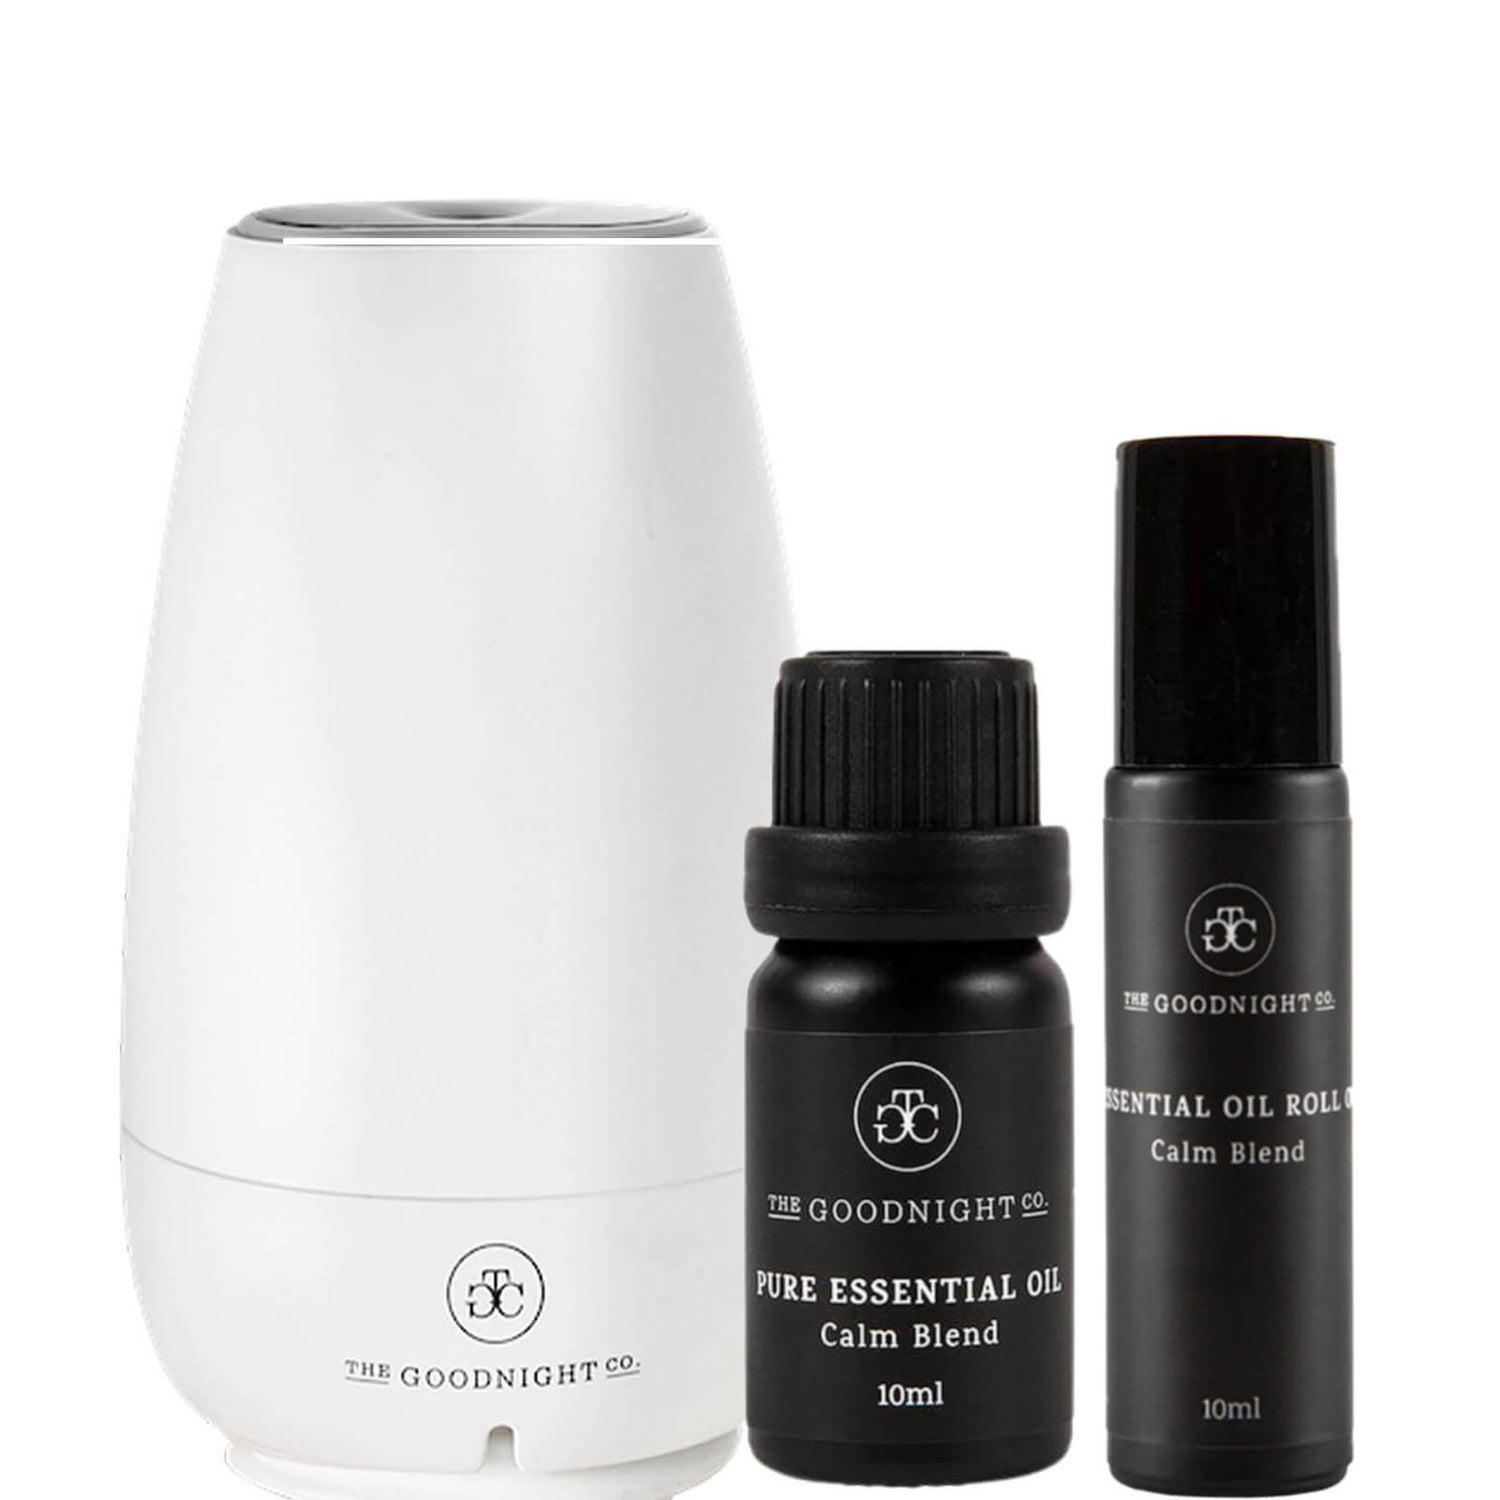 The Goodnight Co. Portable Diffuser and Calming Oils Kit (Worth $130.00)